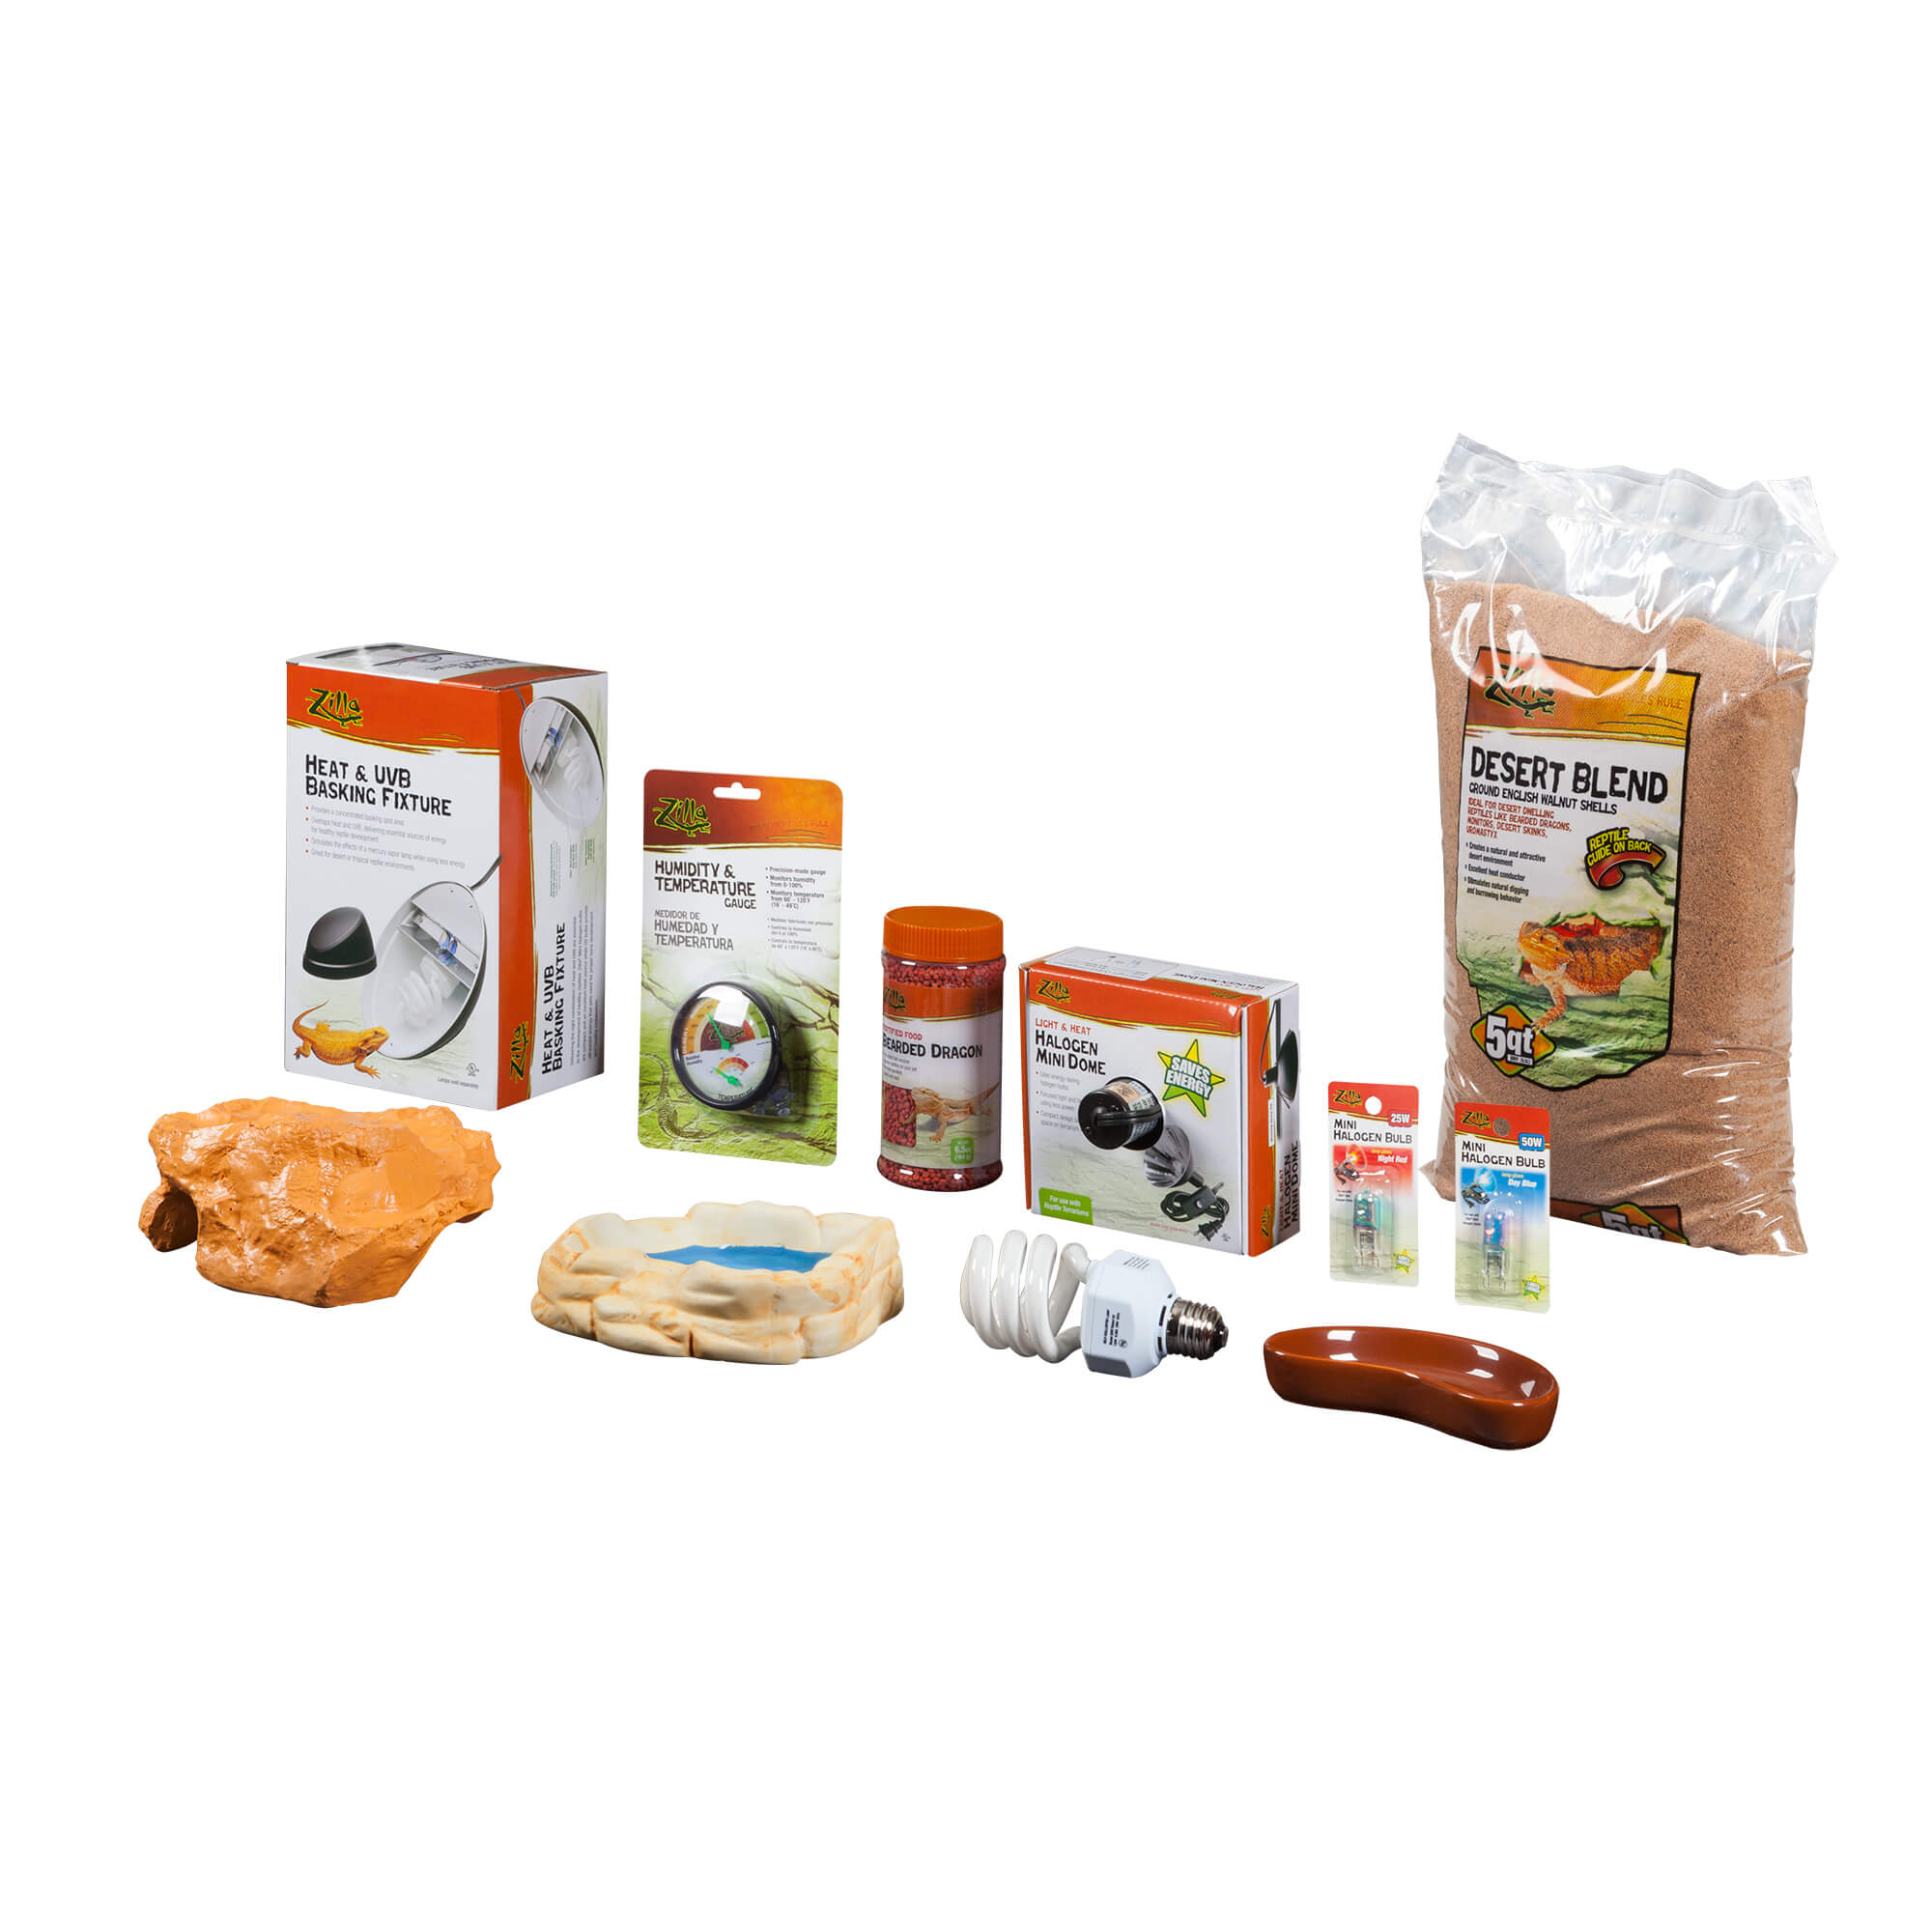 Deluxe Bearded Dragon Kit Contents